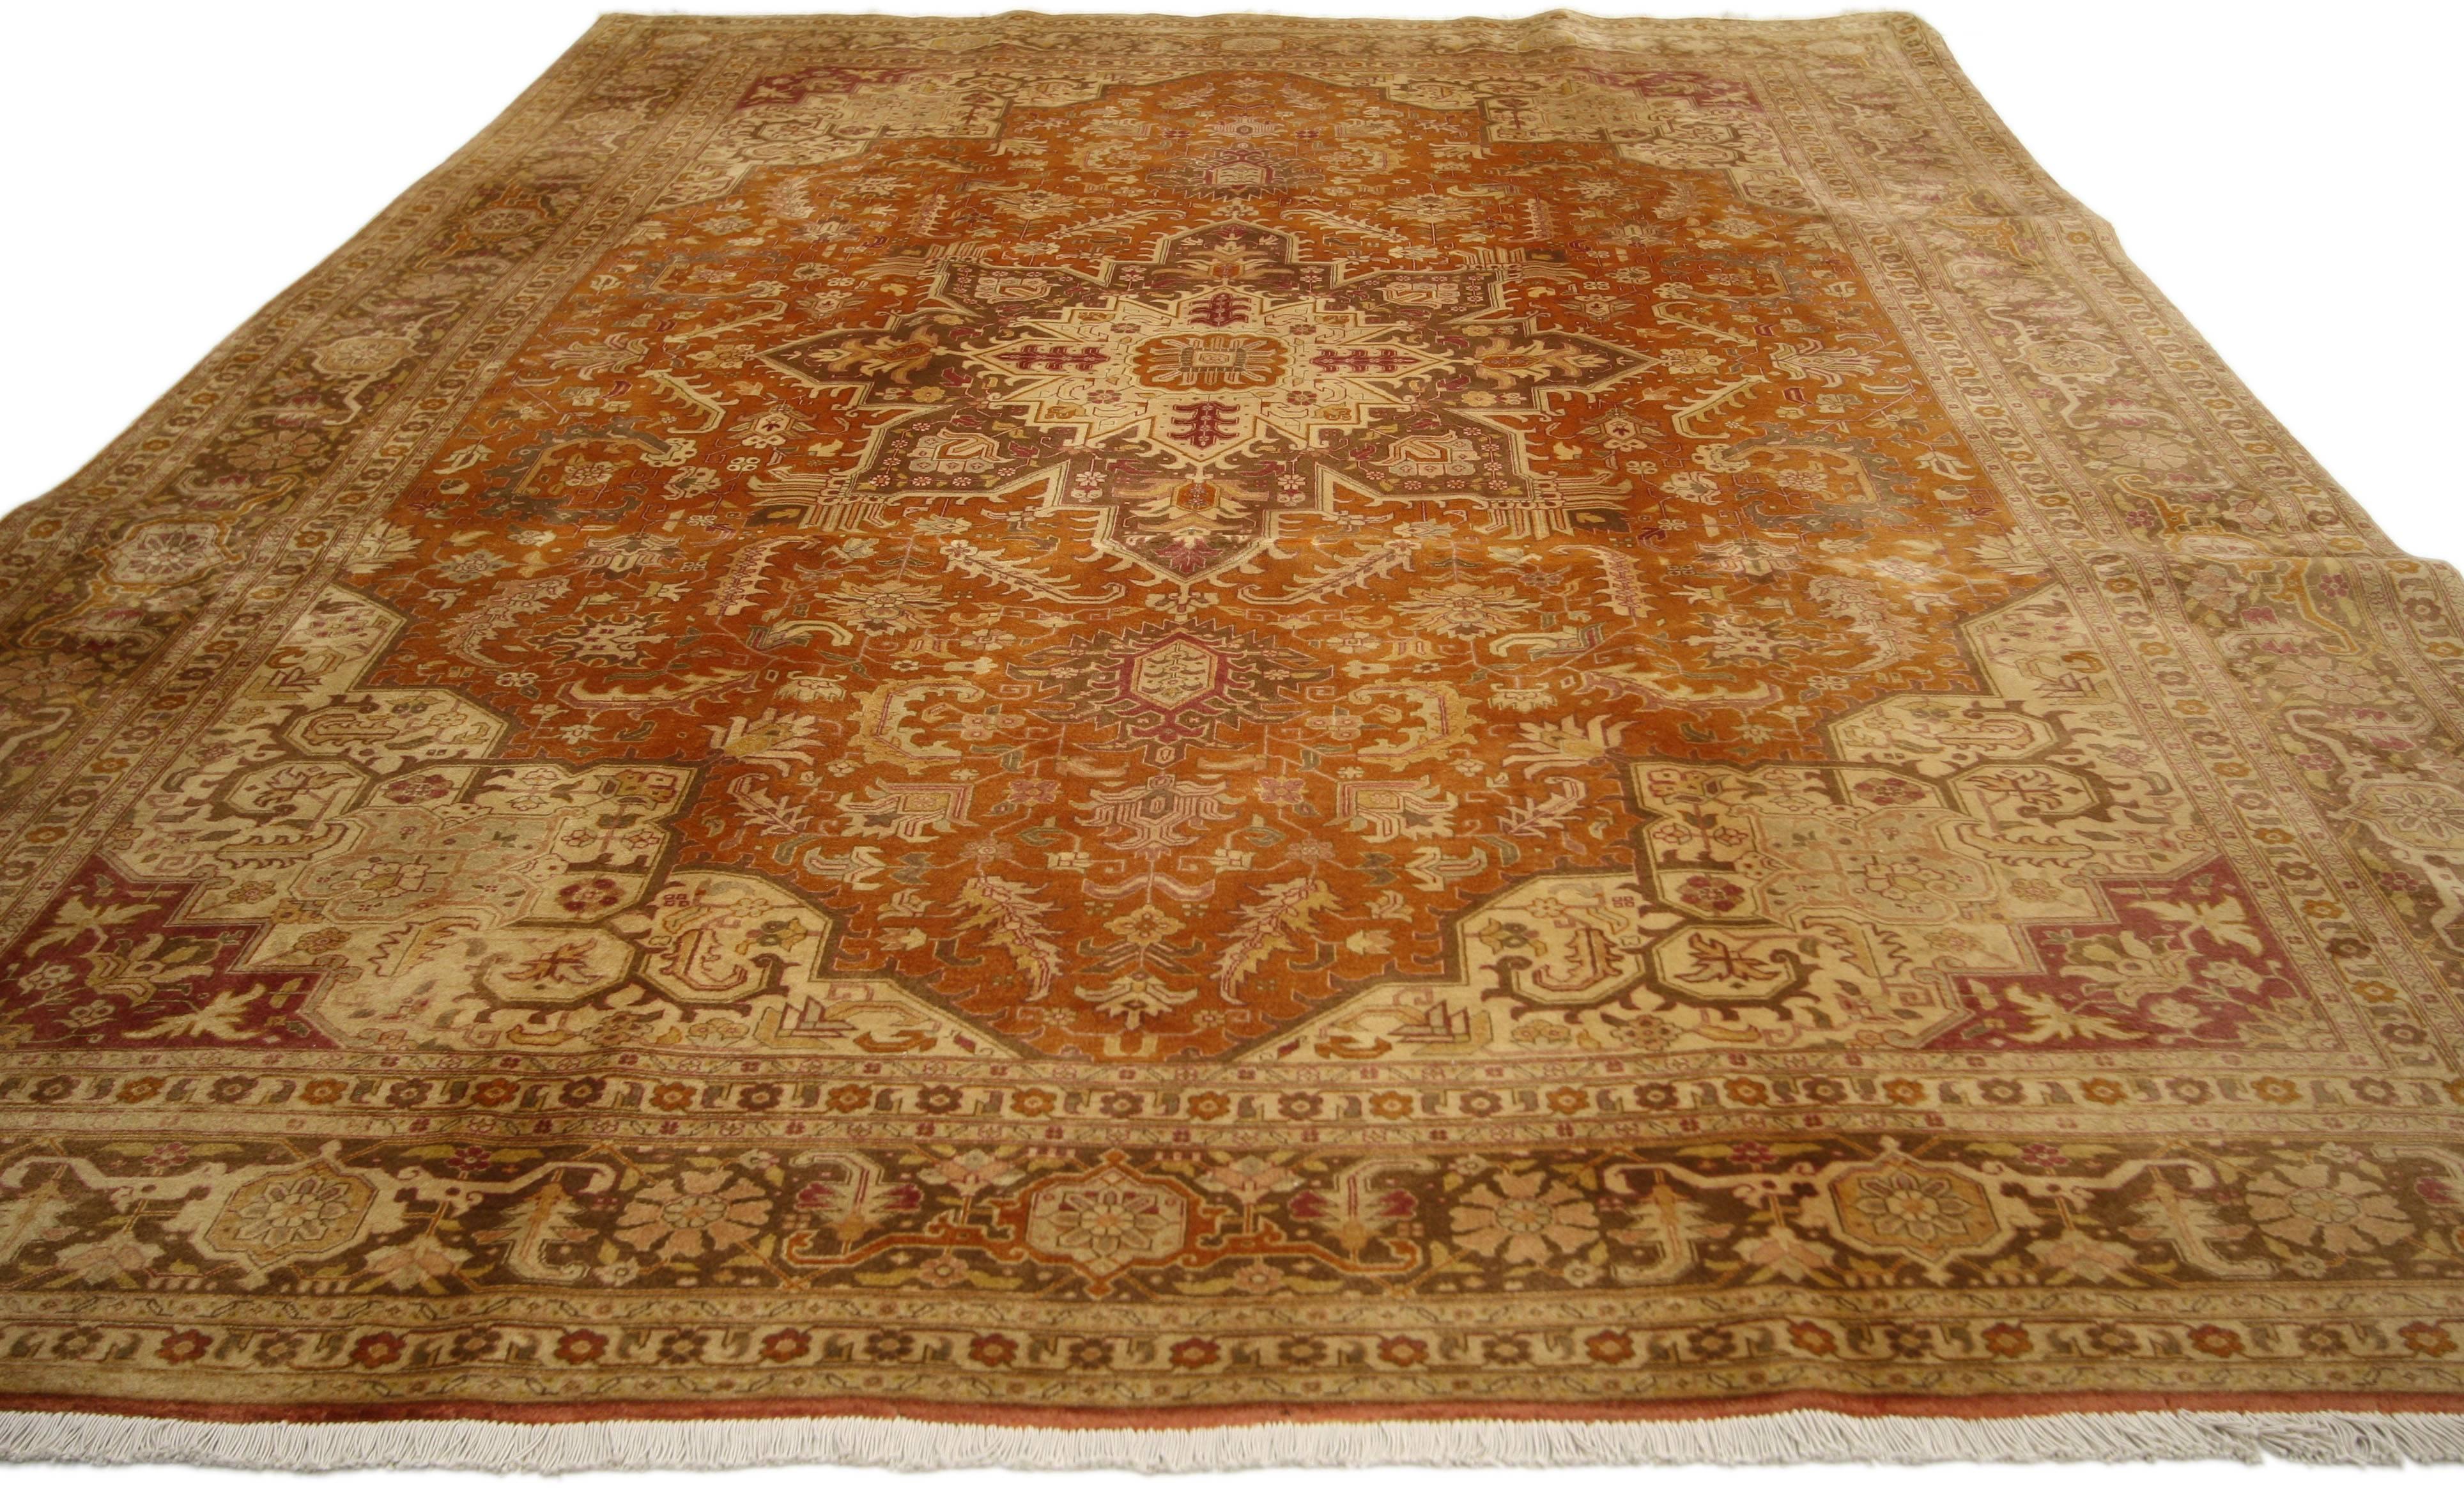 74302, vintage Persian Tabriz rug with traditional style. This hand-knotted wool vintage Persian Tabriz rug features a centre medallion with an all-over geometric pattern surrounded by elaborate spandrels and a Classic border creating a